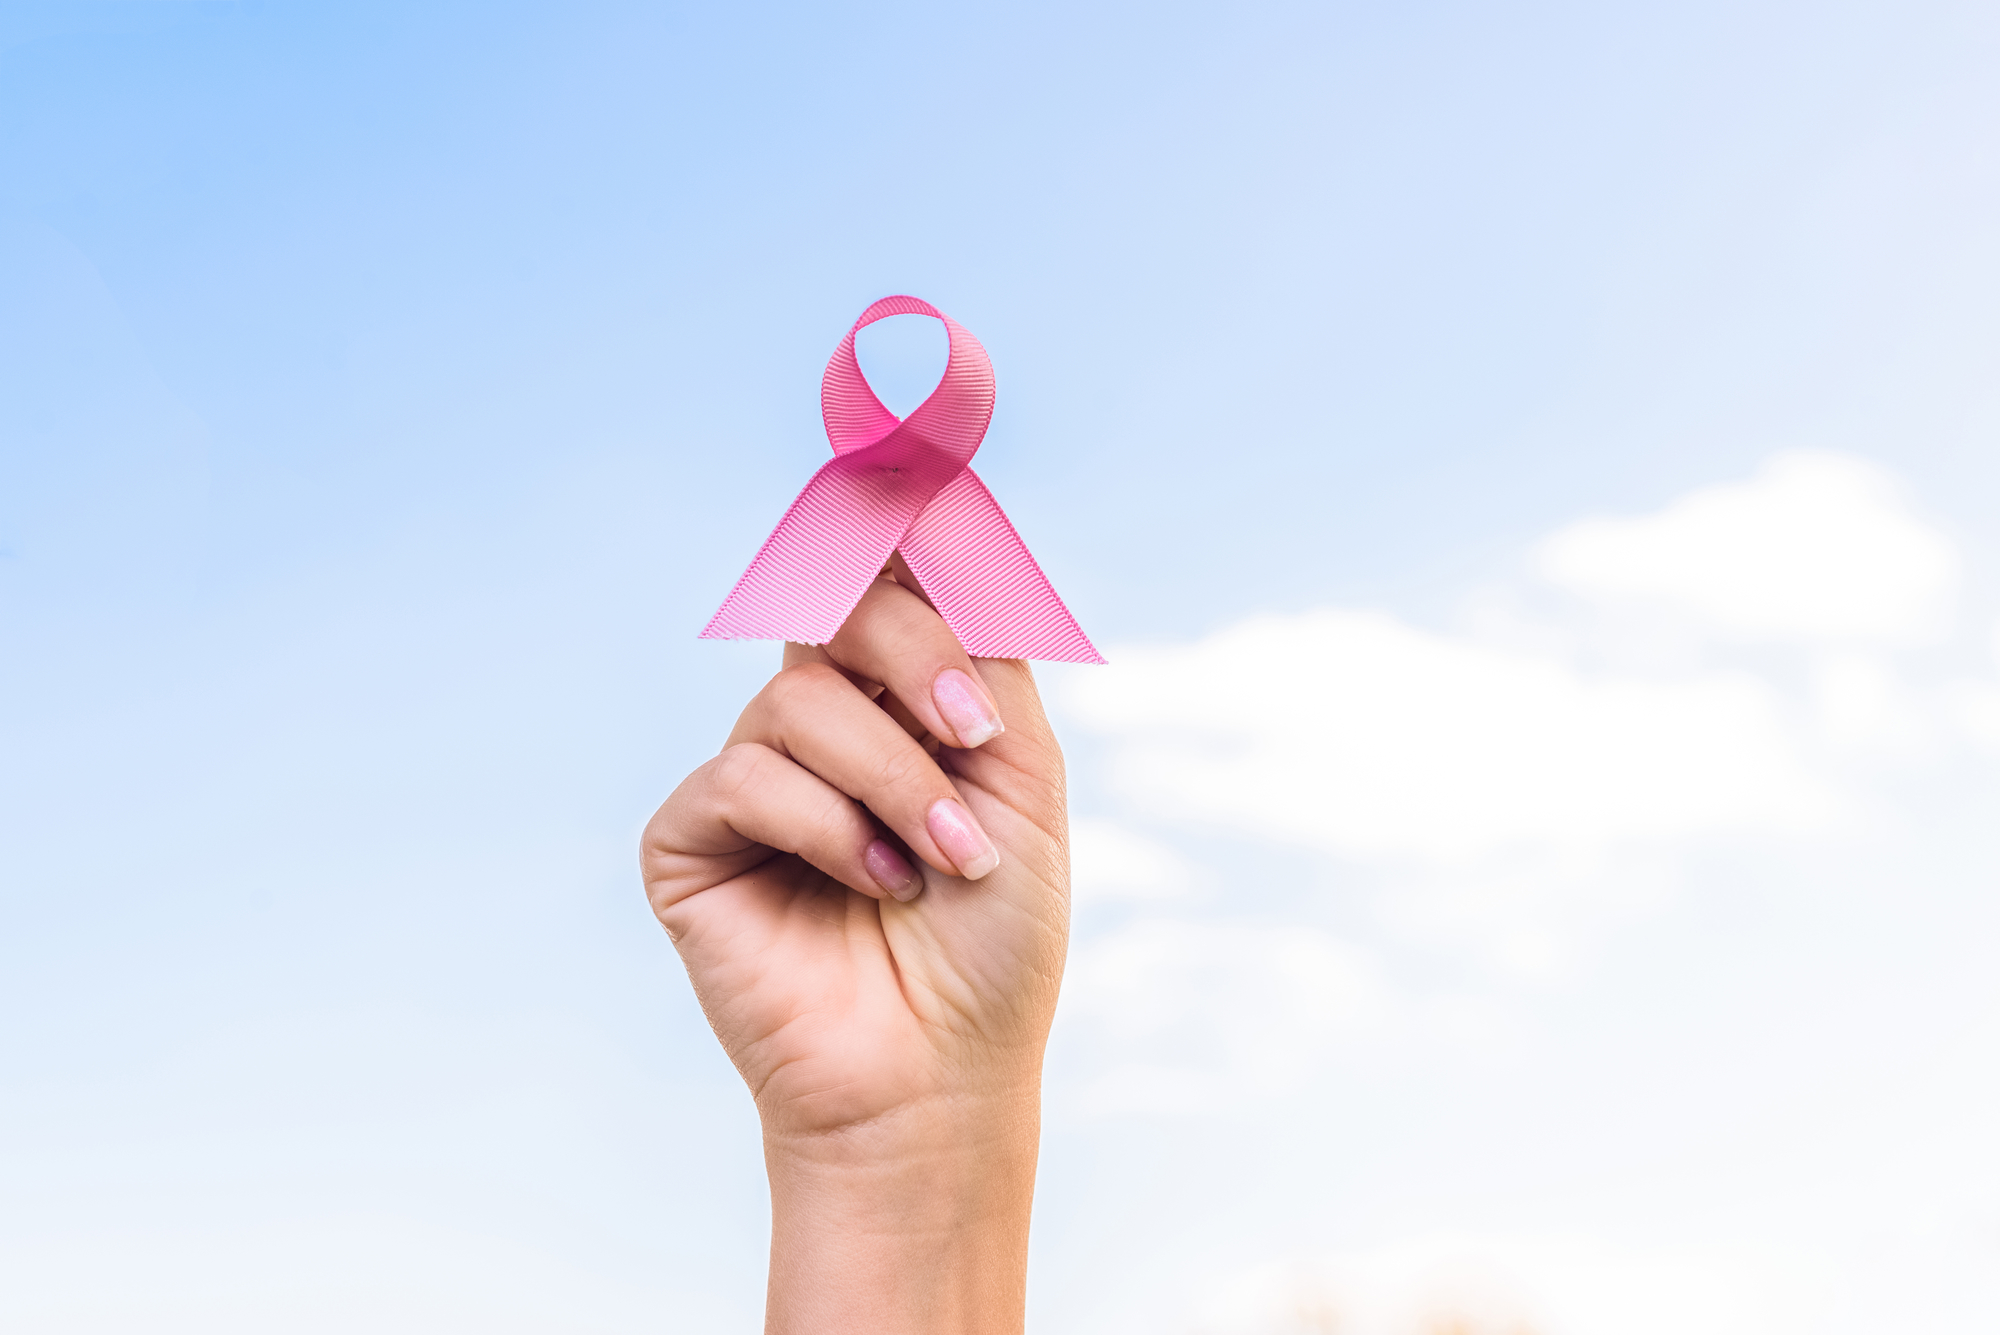 To support breast cancer research, skip pink ribbons and check out these charities